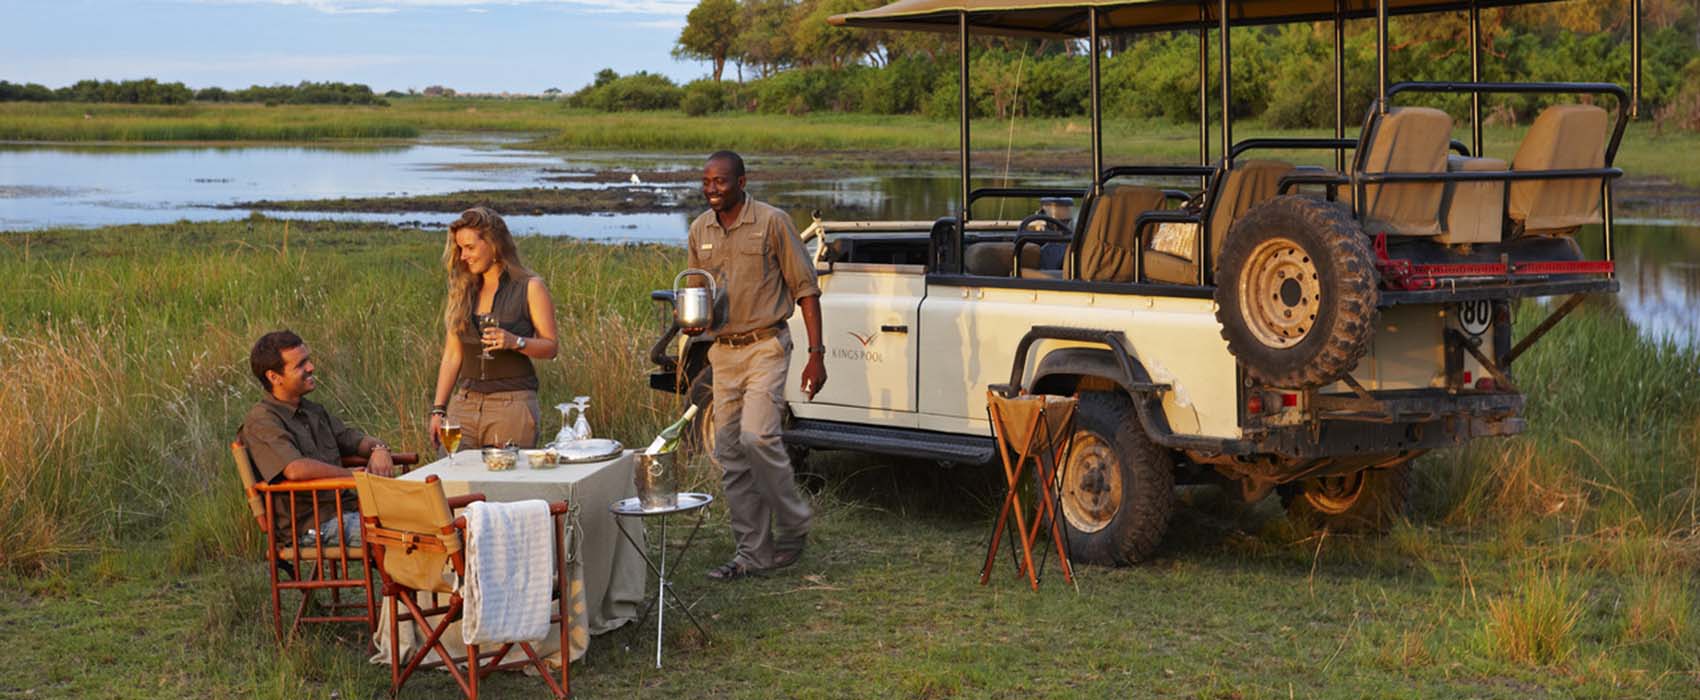 african safaris for boutique honeymoons